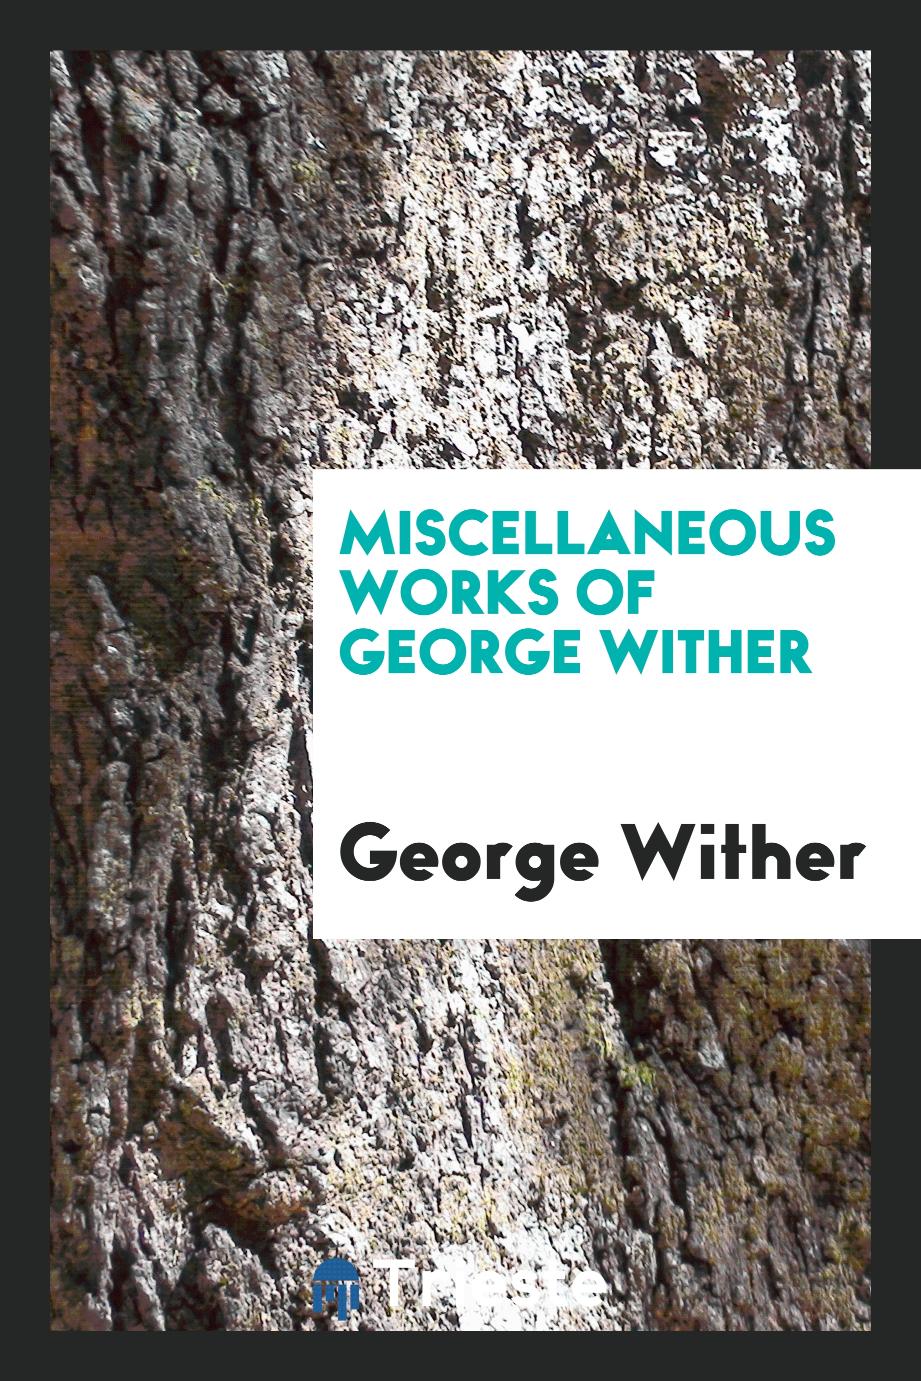 Miscellaneous works of George Wither